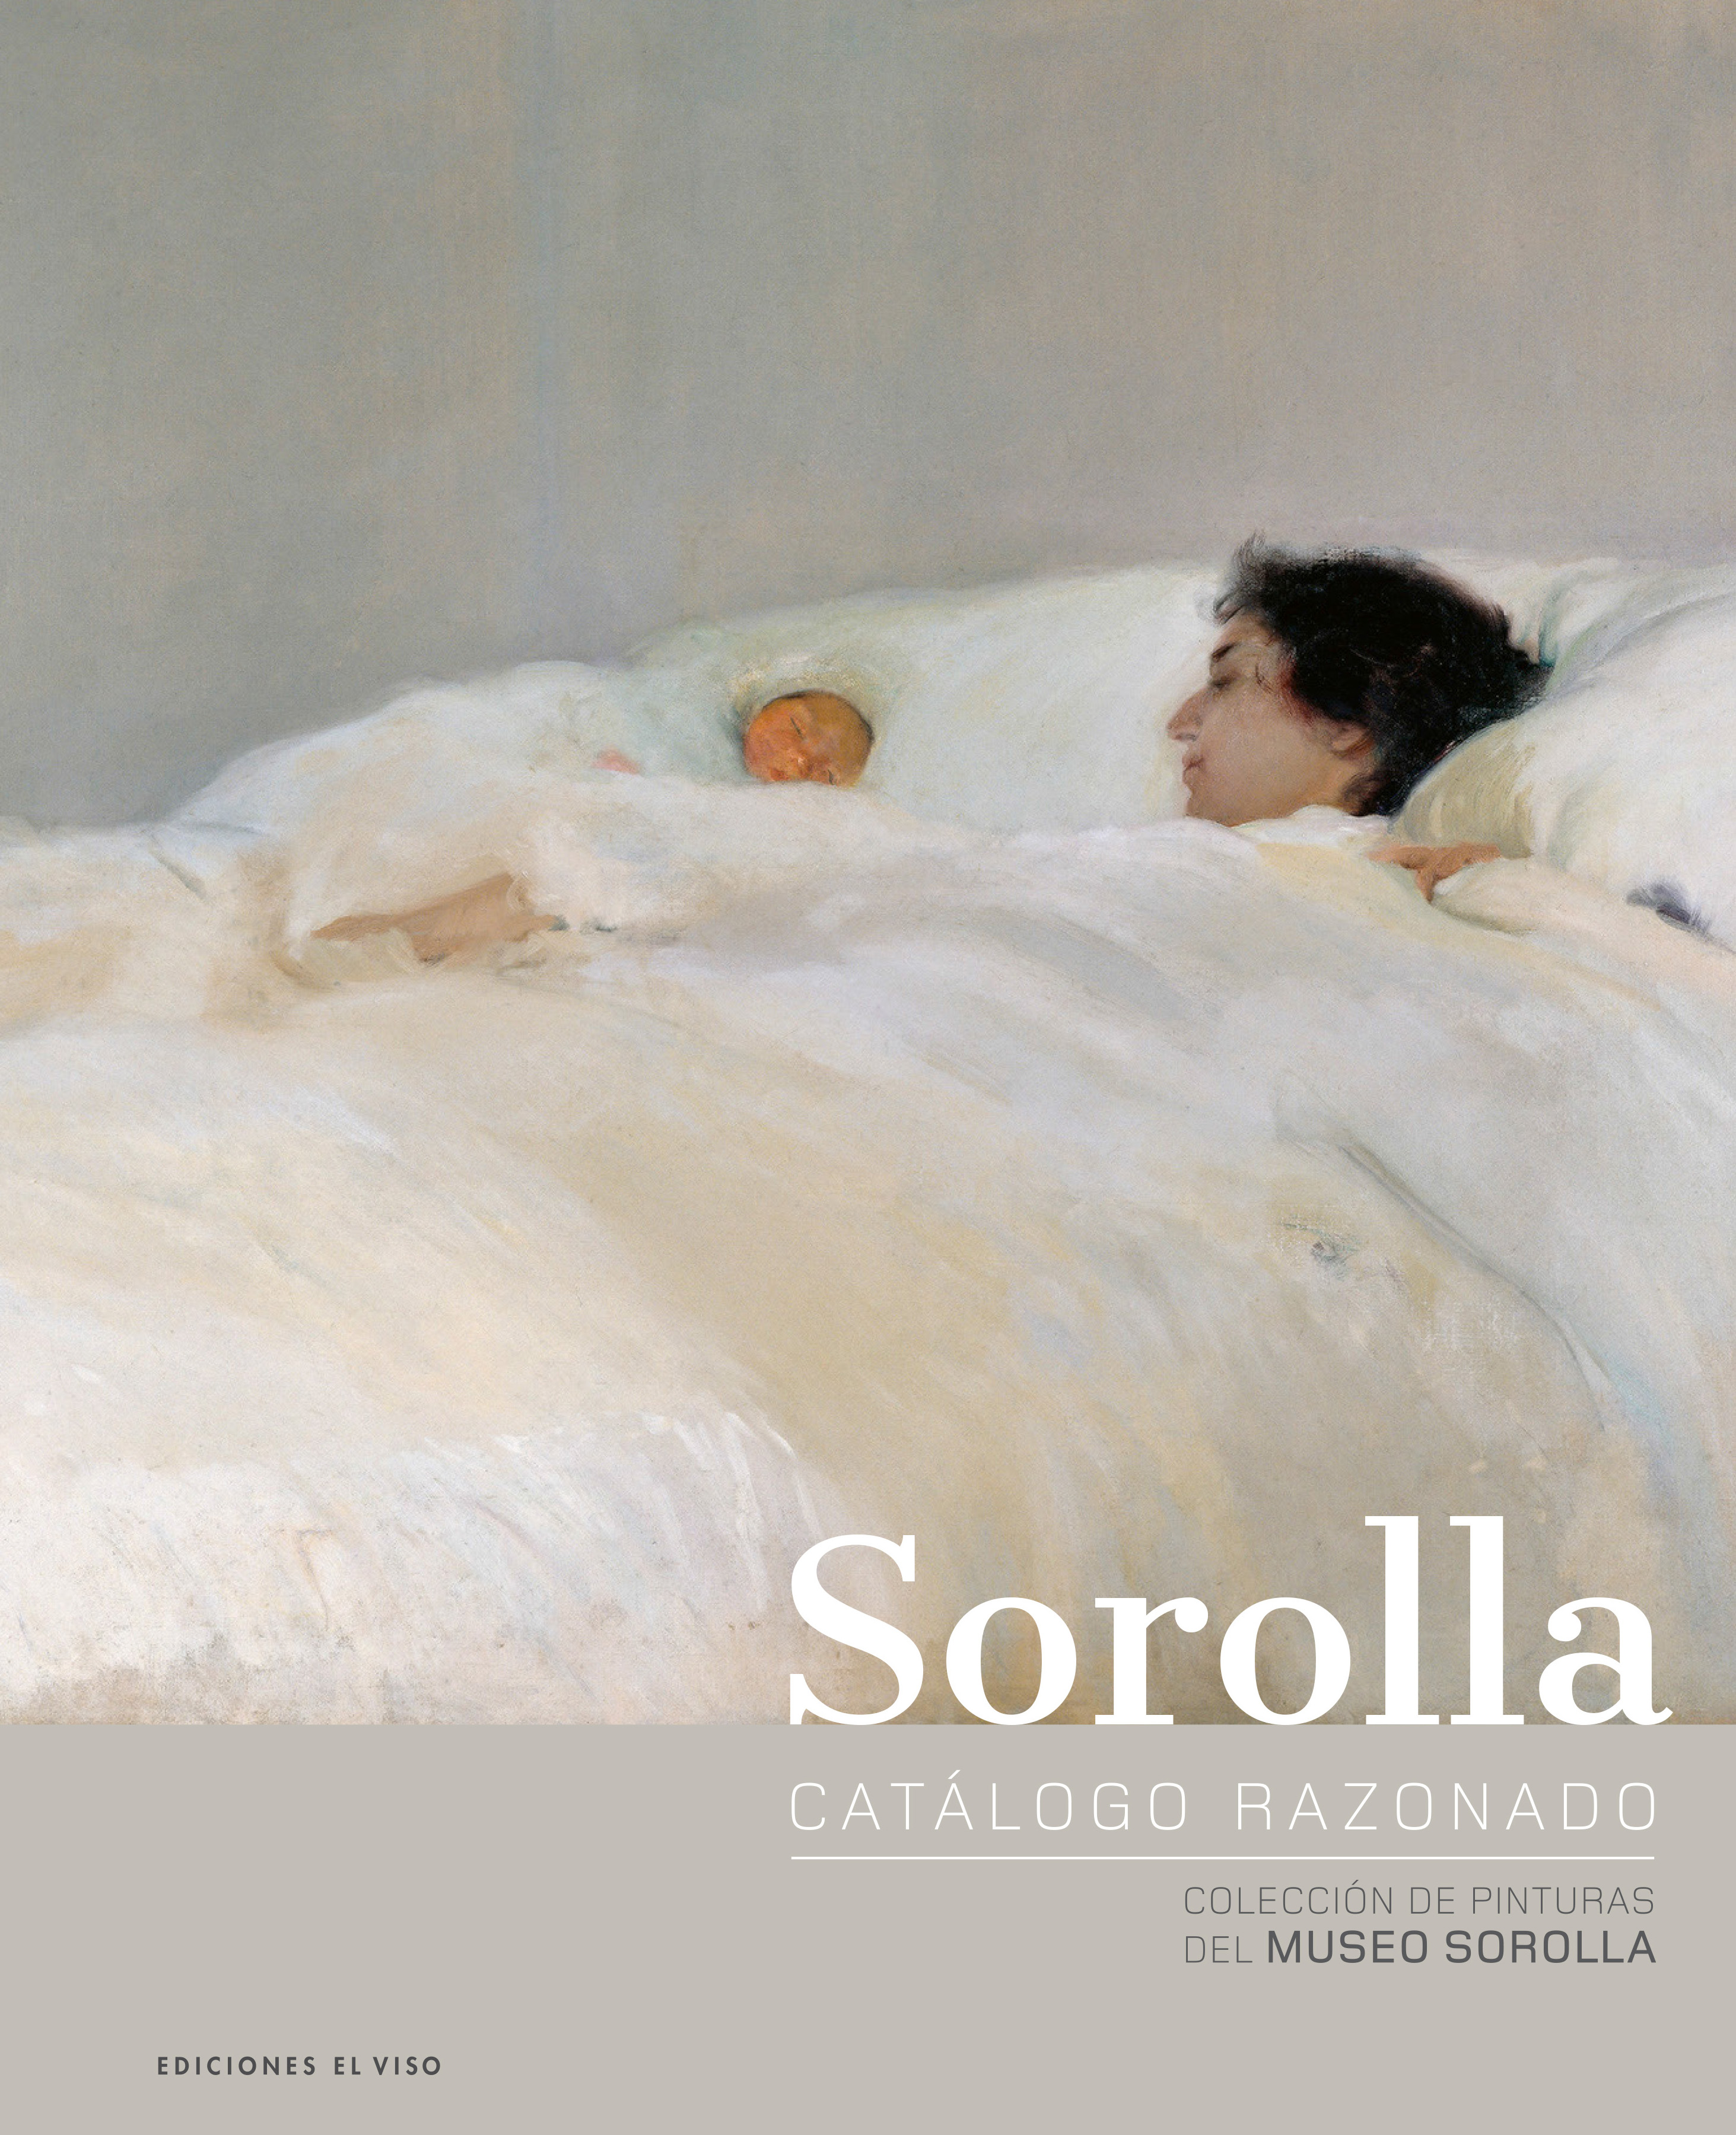 SOROLLA CATALOGUE RAISONNÉ   «PAINTING COLLECTION OF THE MUSEO SOROLLA» (9788412010794)